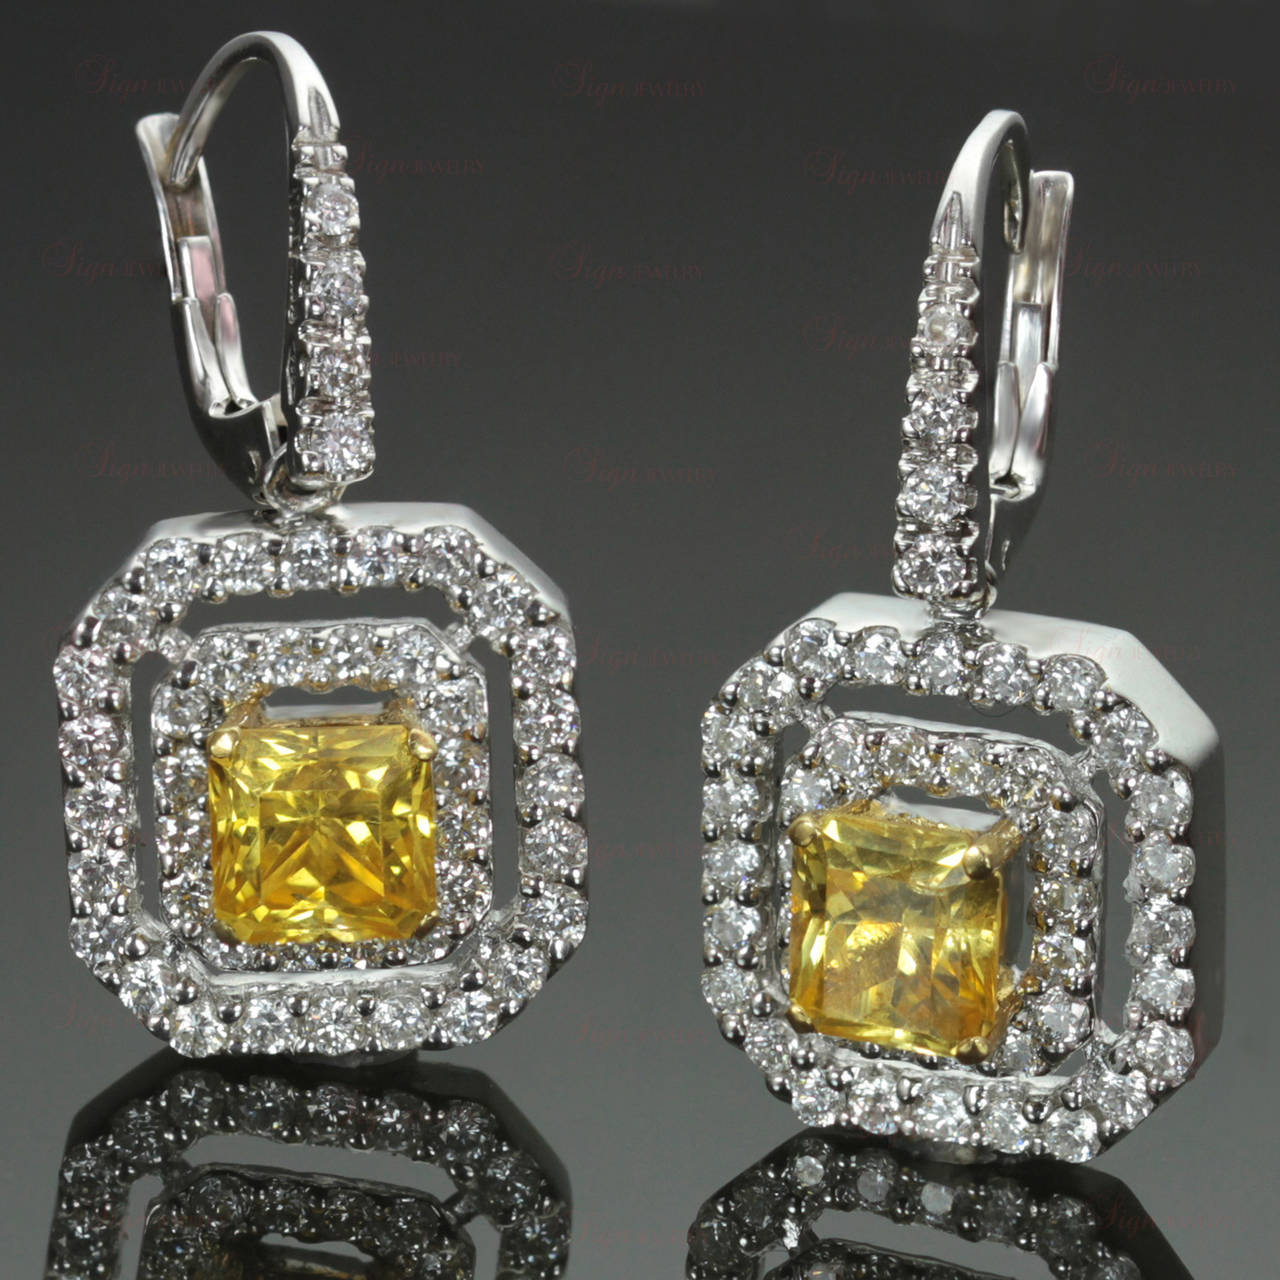 This pair of striking classic earrings features 3 carats natural intense yellow sapphires set in yellow gold with 2.12 carats of VS diamonds set in 18k white gold. Measurements: 0.47" (12mm) width, 1.02" (26mm) length.